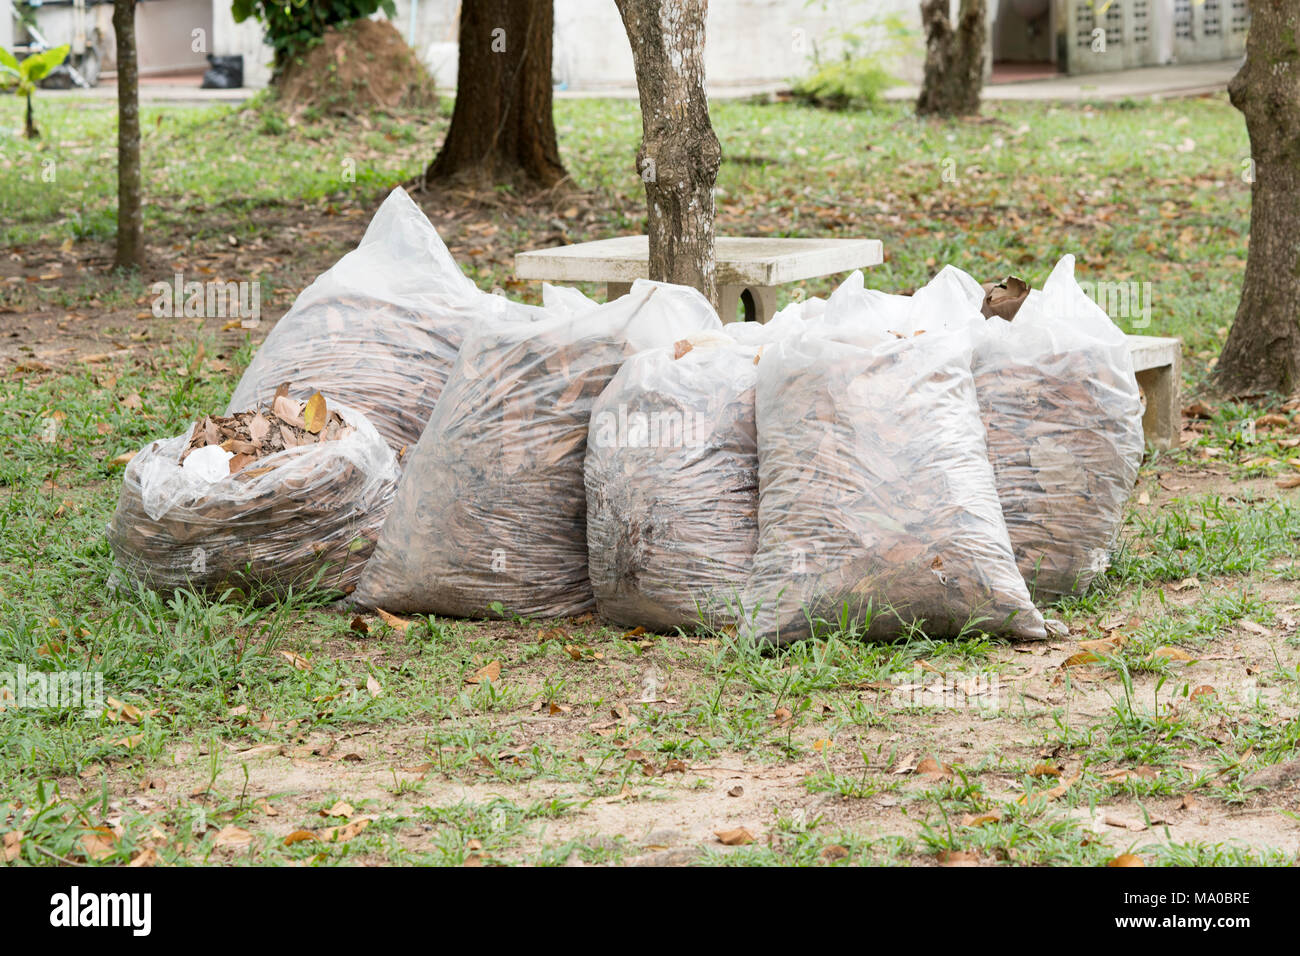 https://c8.alamy.com/comp/MA0BRE/autumn-cleaning-leavespile-of-full-white-garbage-bags-on-the-grass-in-the-parkleaves-in-bag-garbage-MA0BRE.jpg